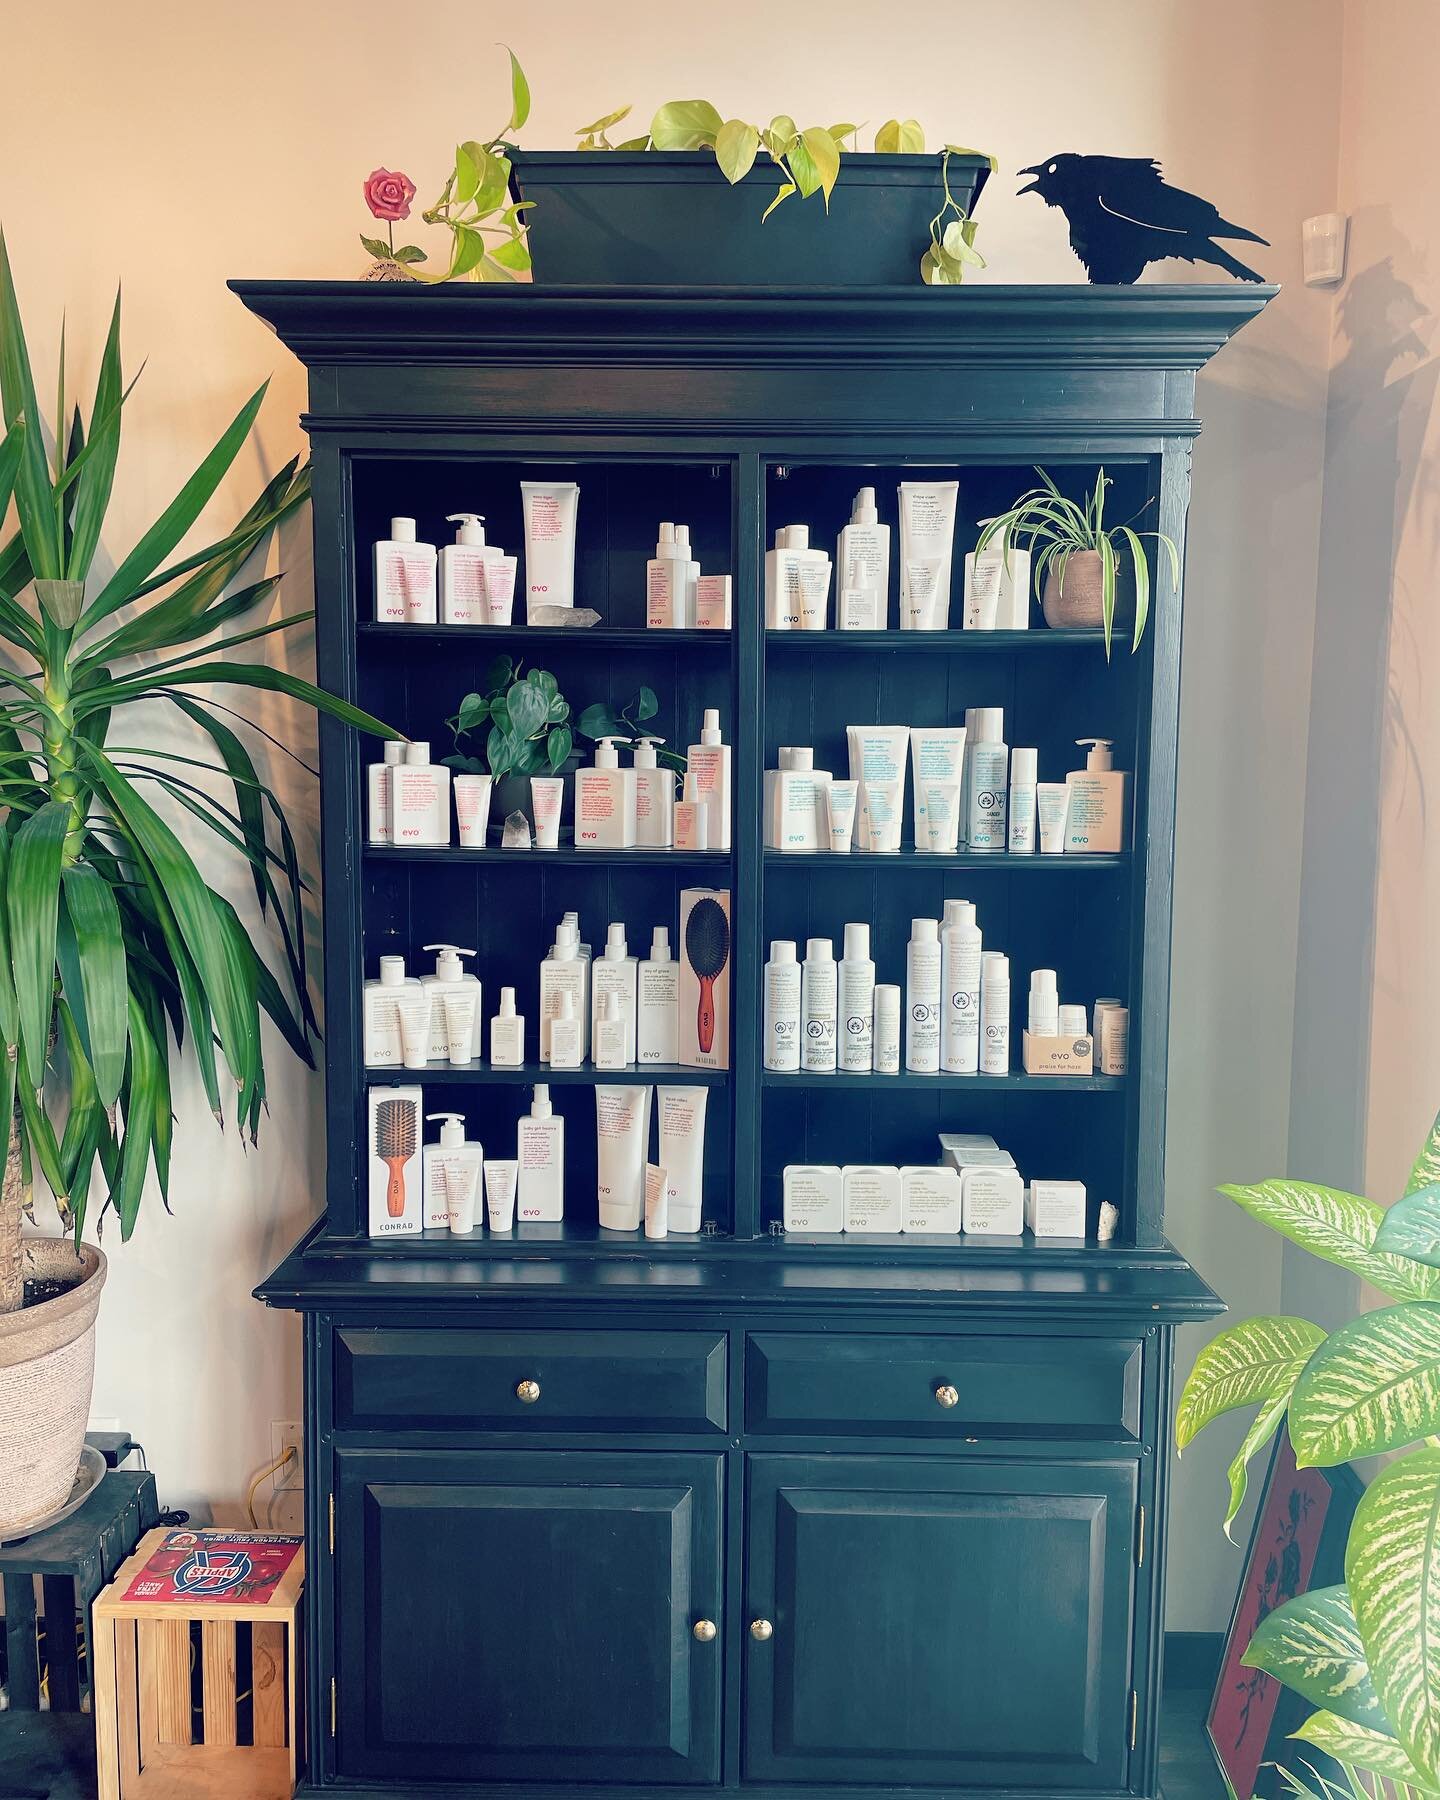 Our beautiful front end and @evohair display got a makeover. Thanks @colourbycharlee for the amazing cabinet. Our favourite haircare line really pops in the new display. 

@evopro @d.raineged.hair 

#salon #salonretail #antiques #vintage #evohair #ha